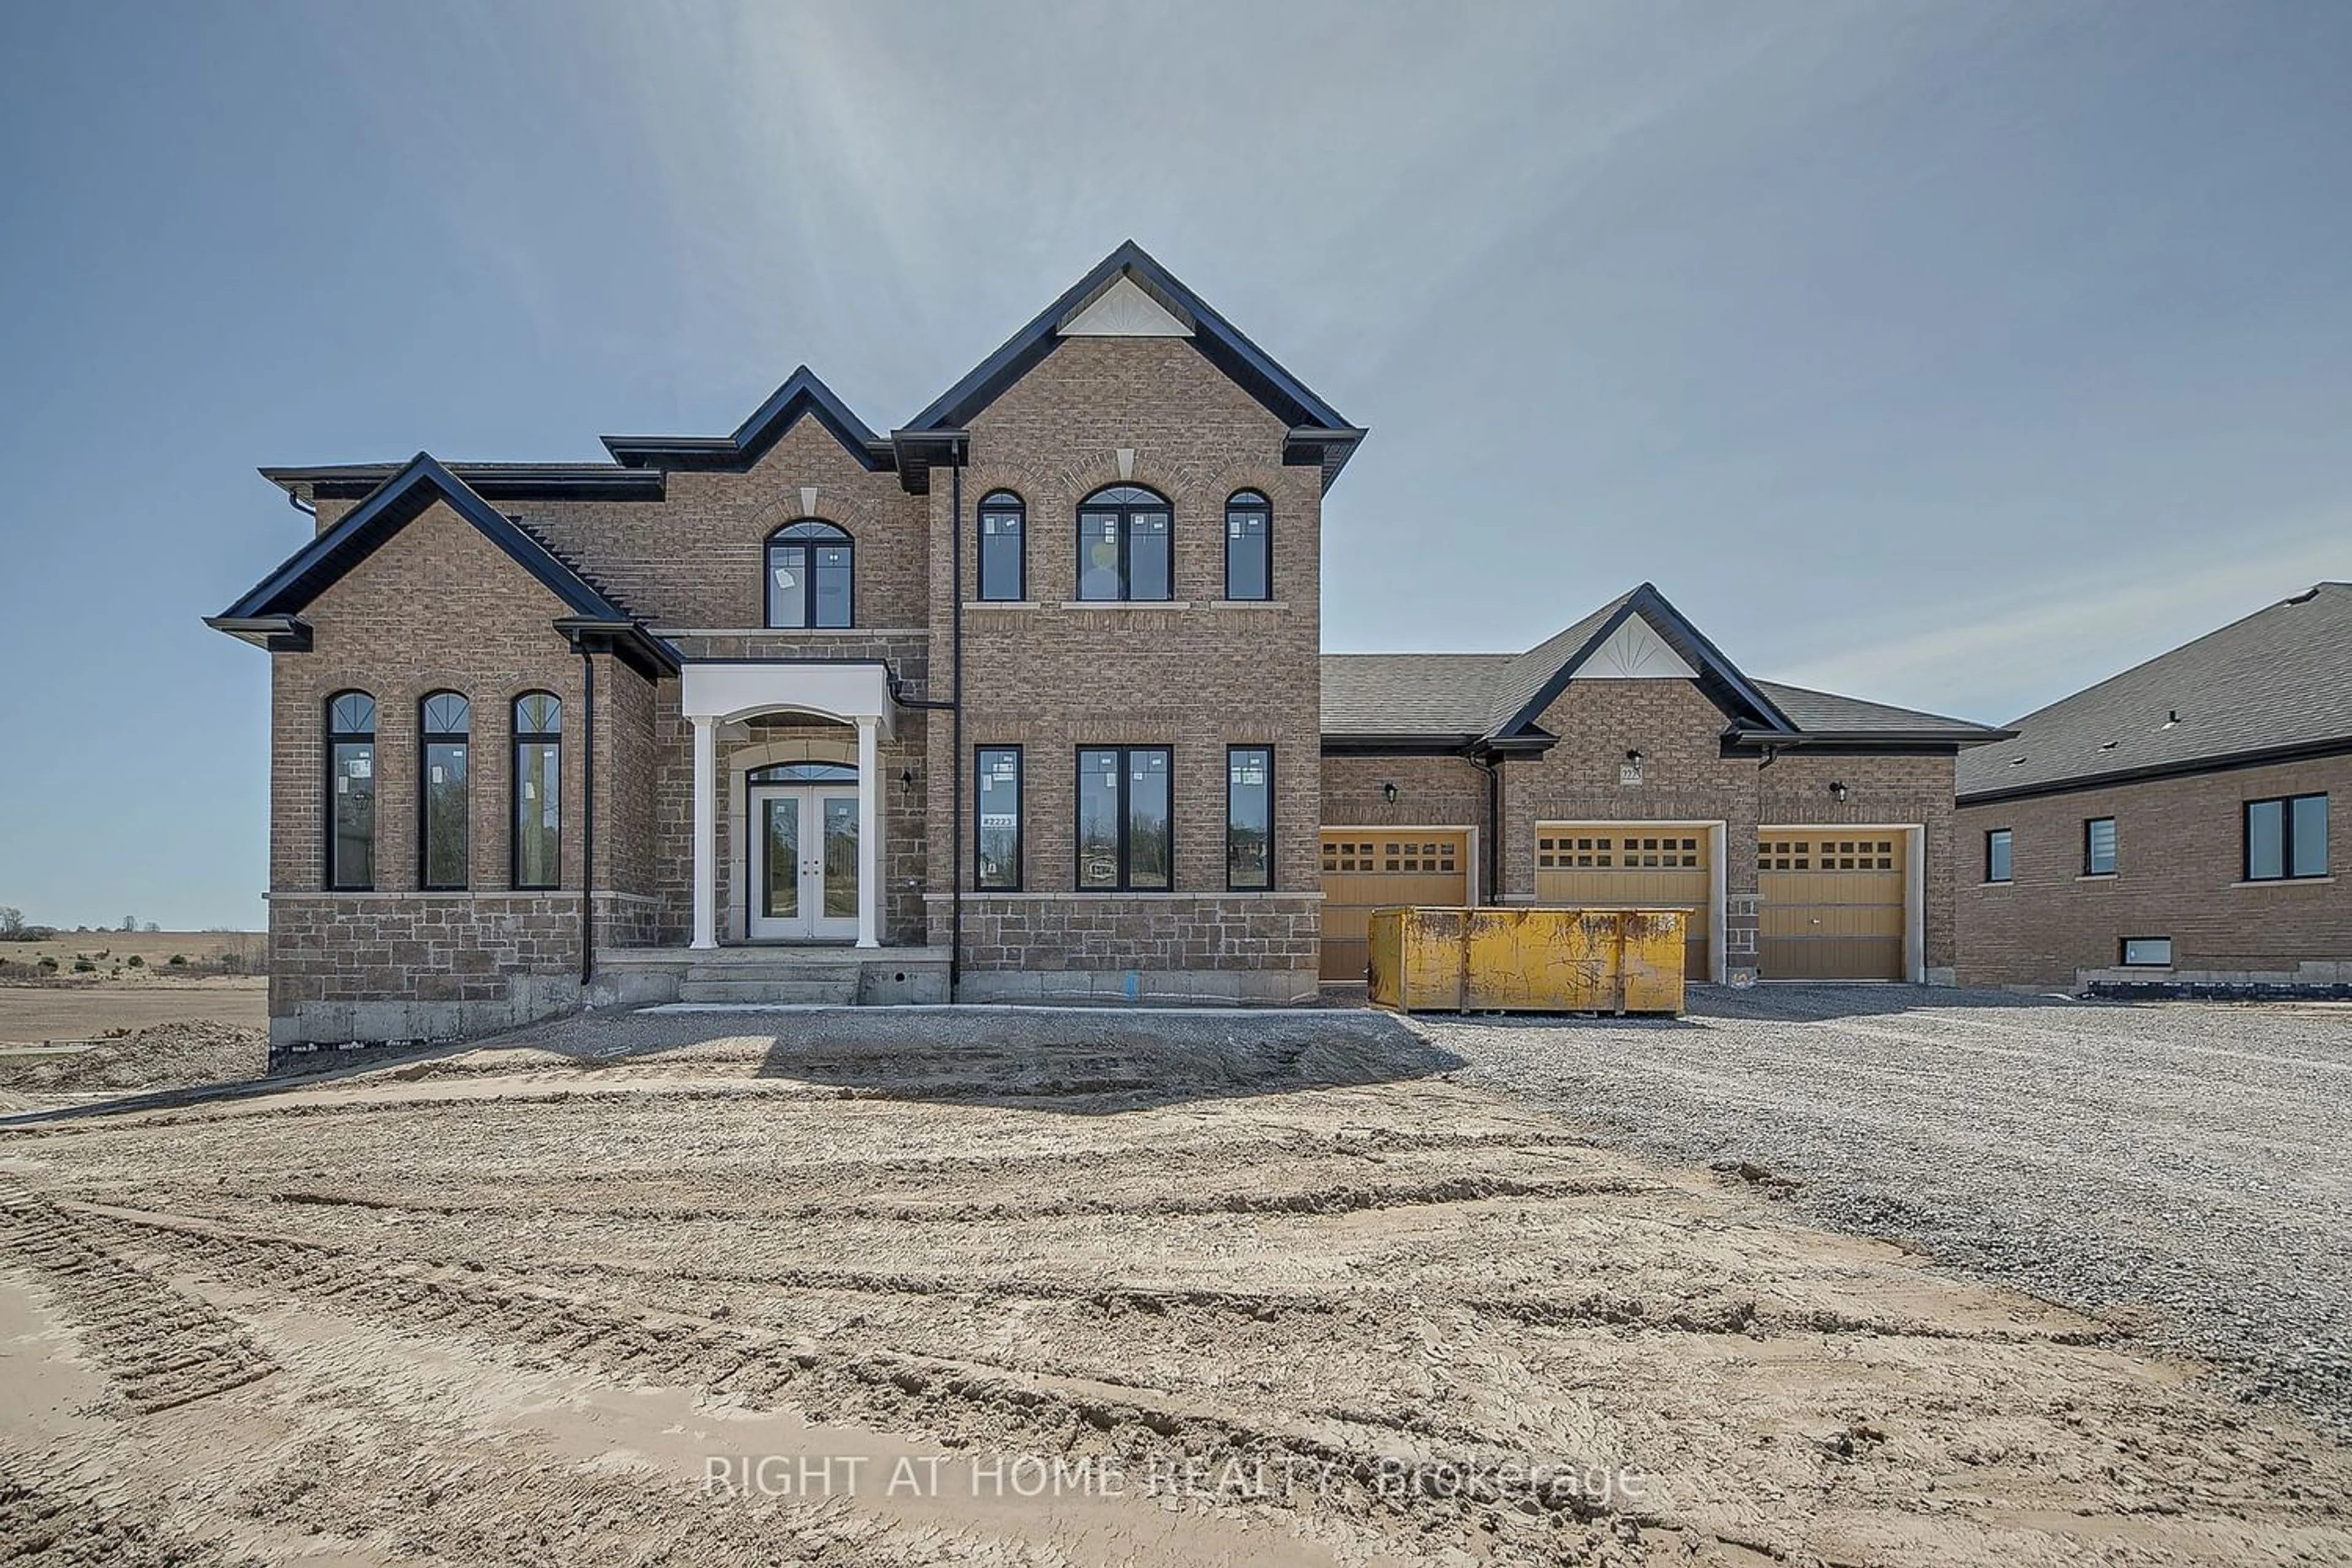 Home with brick exterior material for 2223 Greg Gemmell Way, Innisfil Ontario L0L 1K0